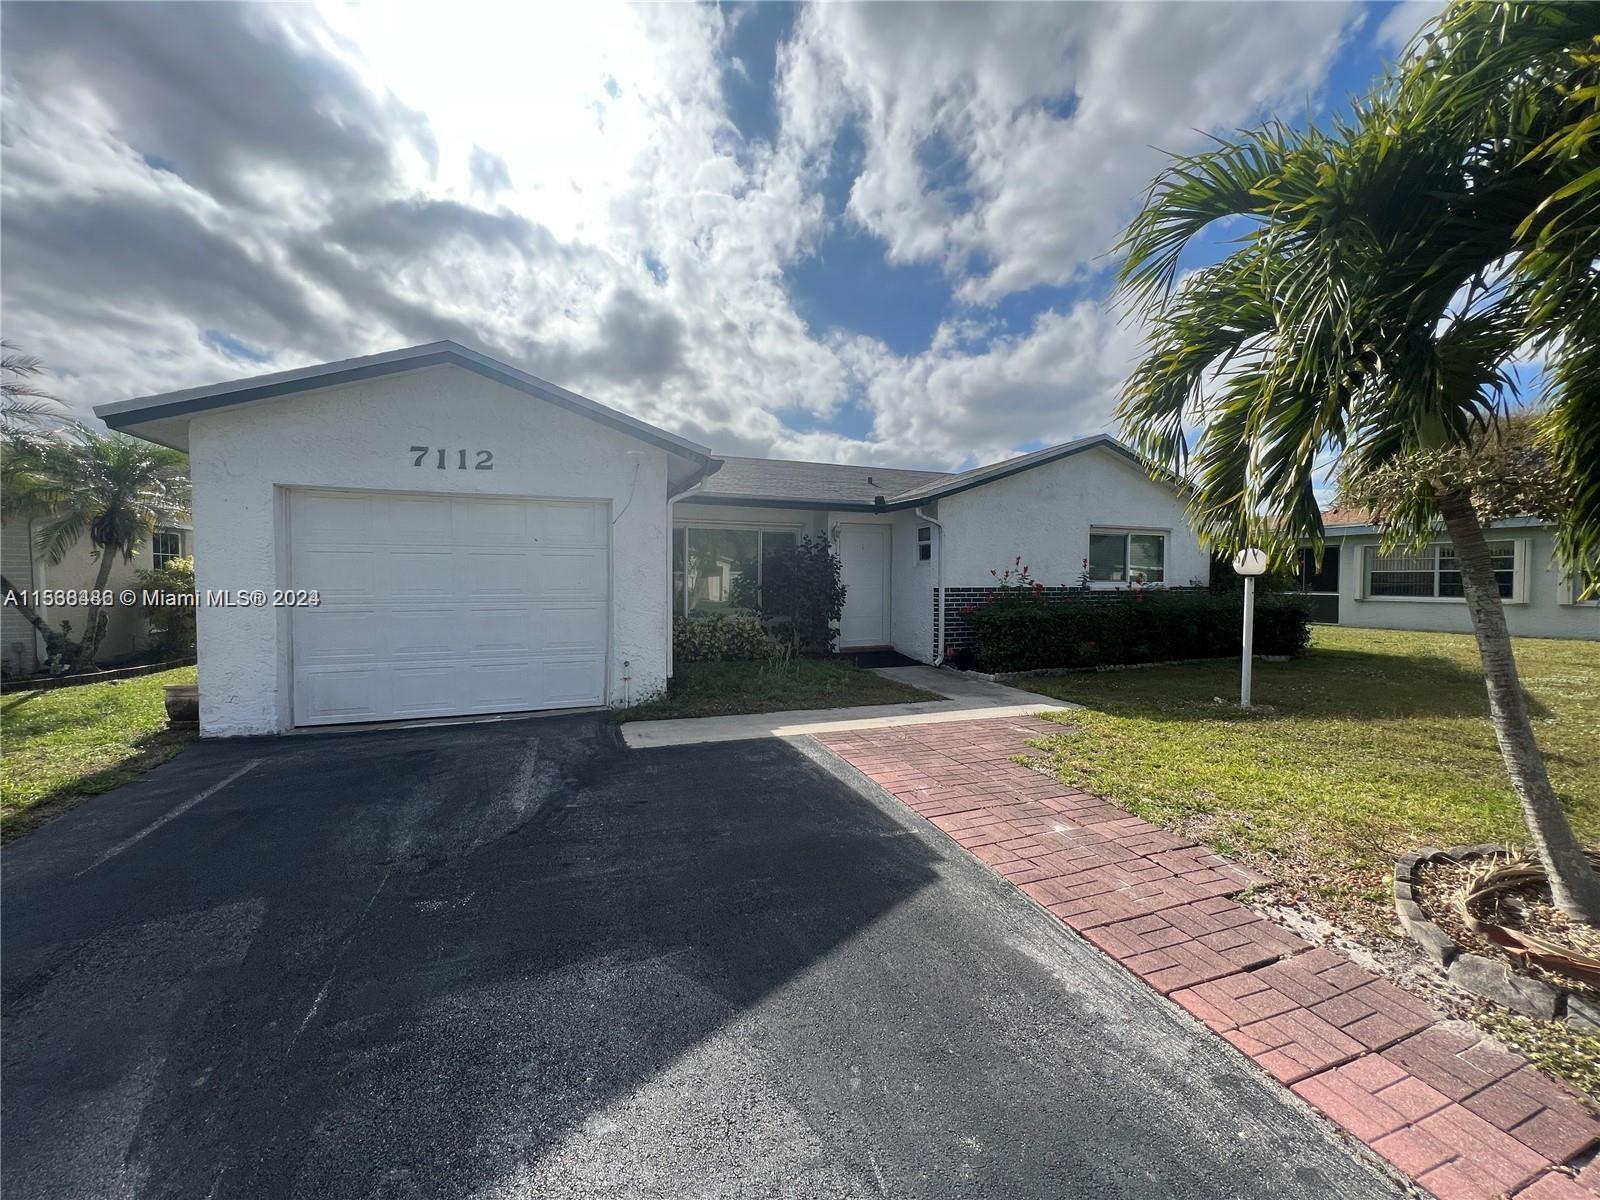 7112 Pine Manor Dr, Lake Worth, Palm Beach County, Florida - 5 Bedrooms  
2 Bathrooms - 